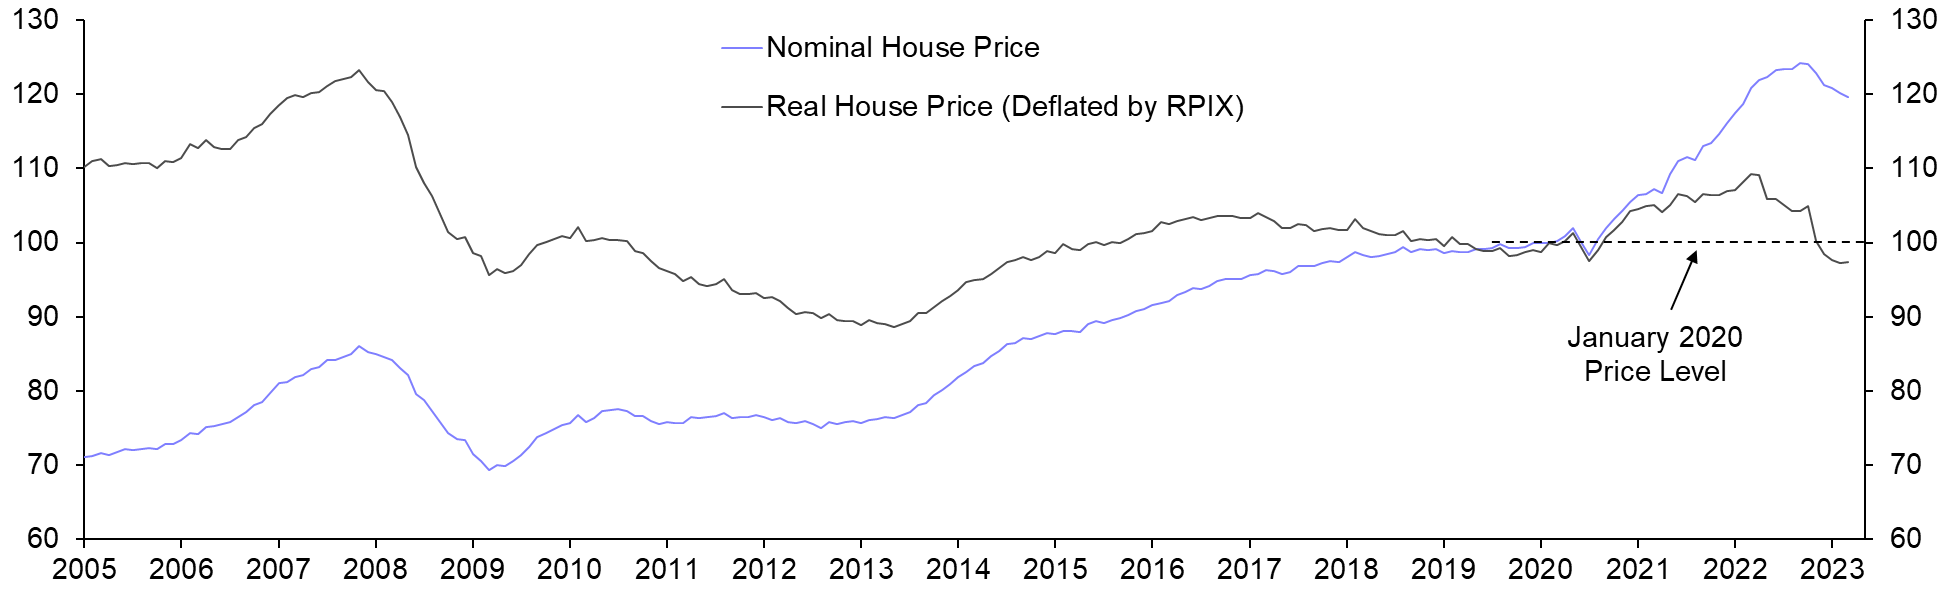 Nationwide House Prices (Feb.)
